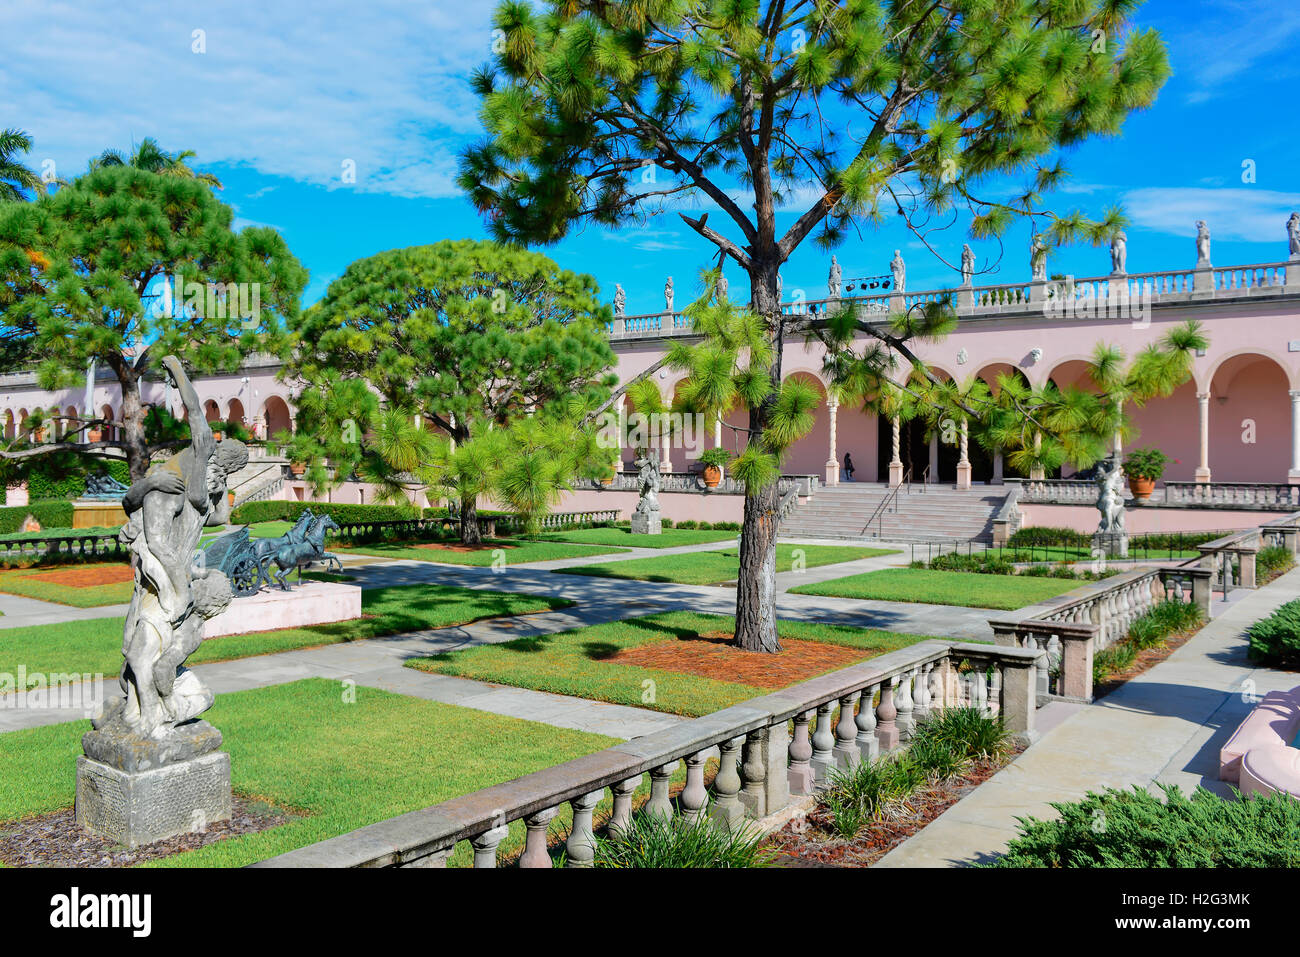 David statue overlooks Opulent Venetian Style gardens and statues atop the Pink portico at Ringling Museum of Art Sarasota FL Stock Photo